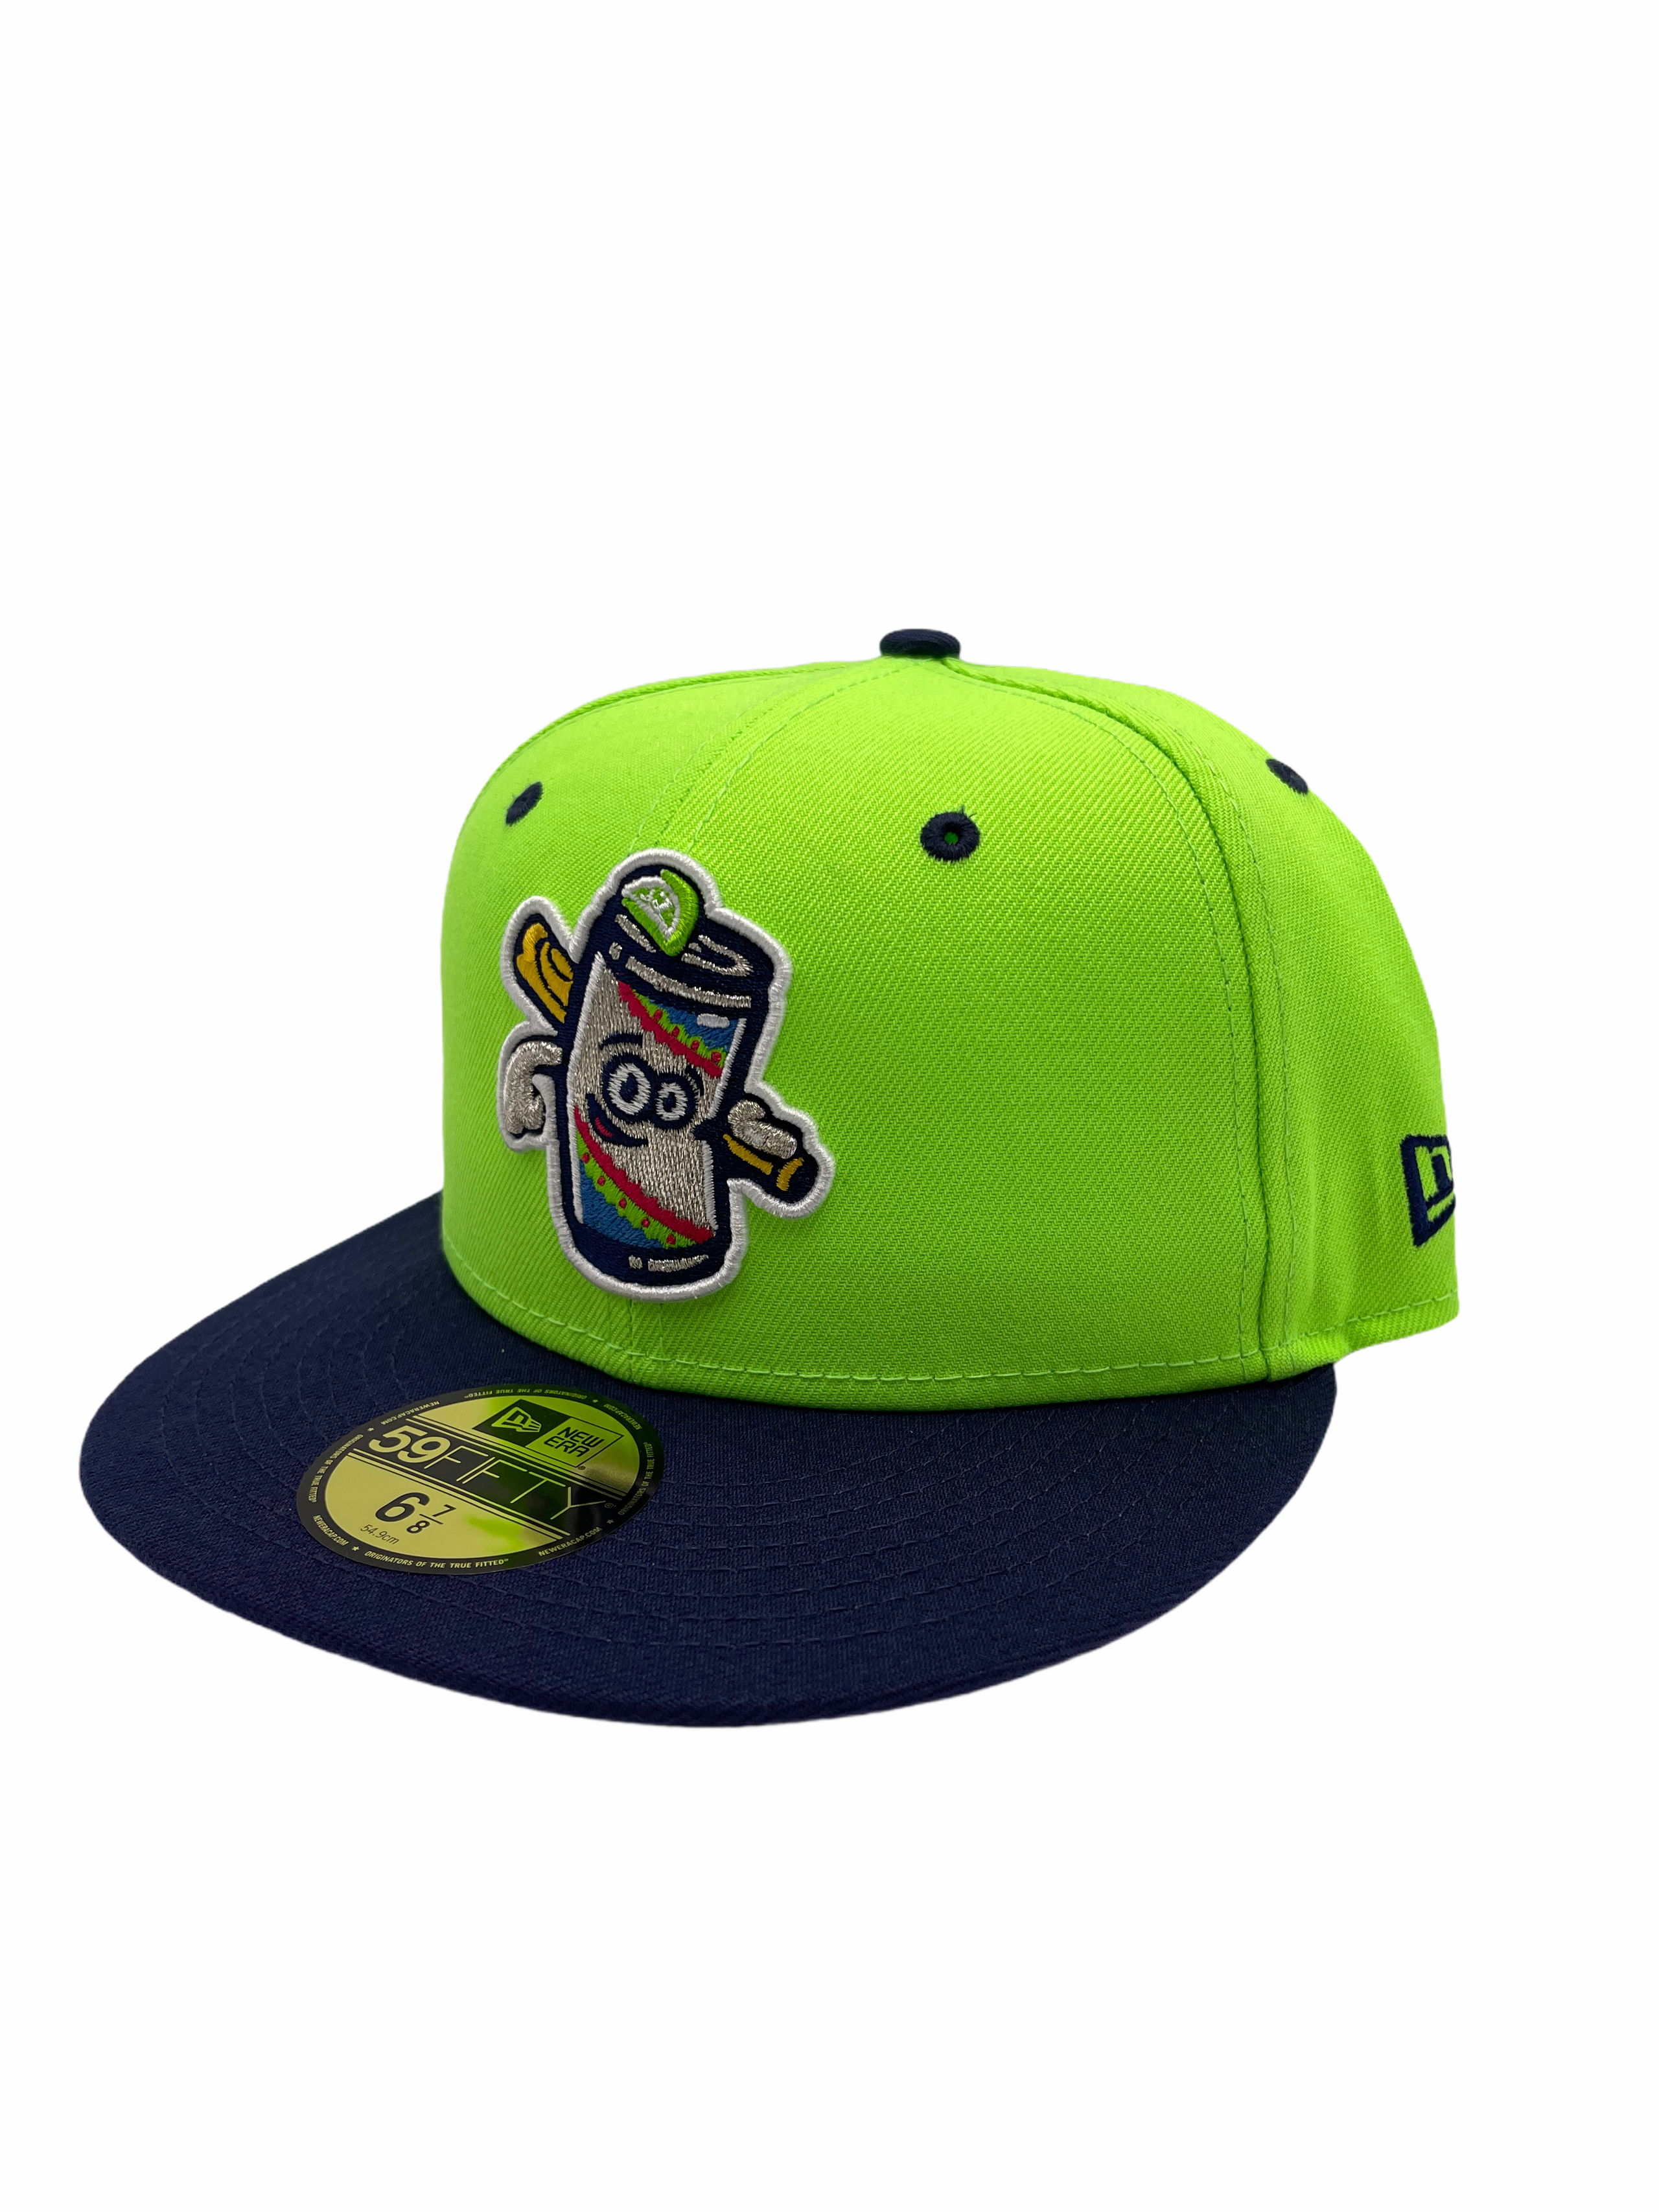 Durham Bulls COPA Lime-Navy Fitted Hat by New Era